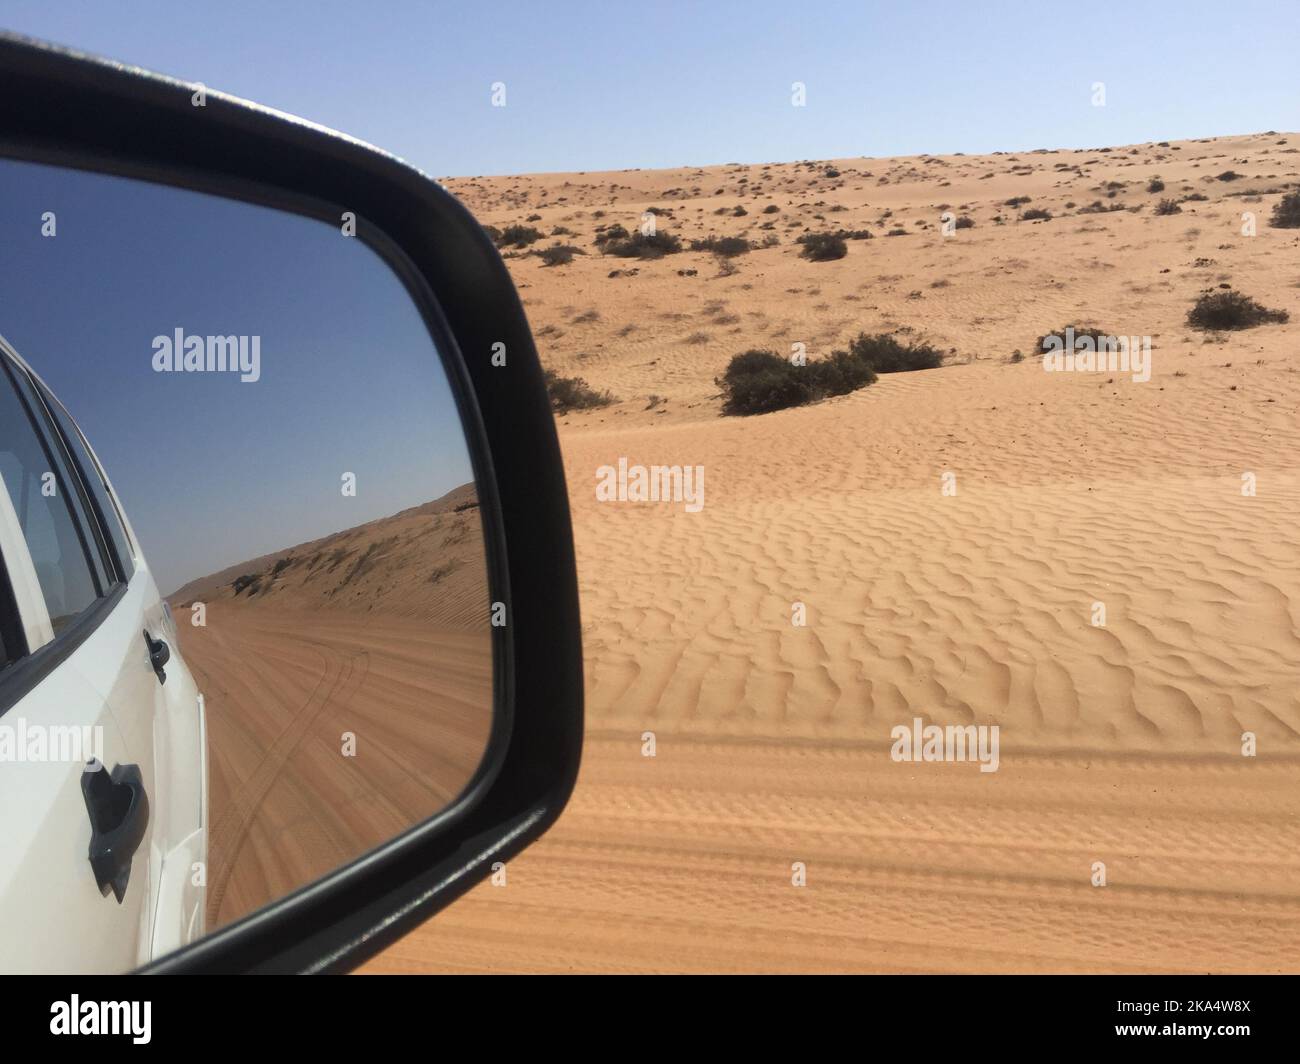 Reflection of road through sand dunes in a car wing mirror, Wahiba Sands, Oman Stock Photo